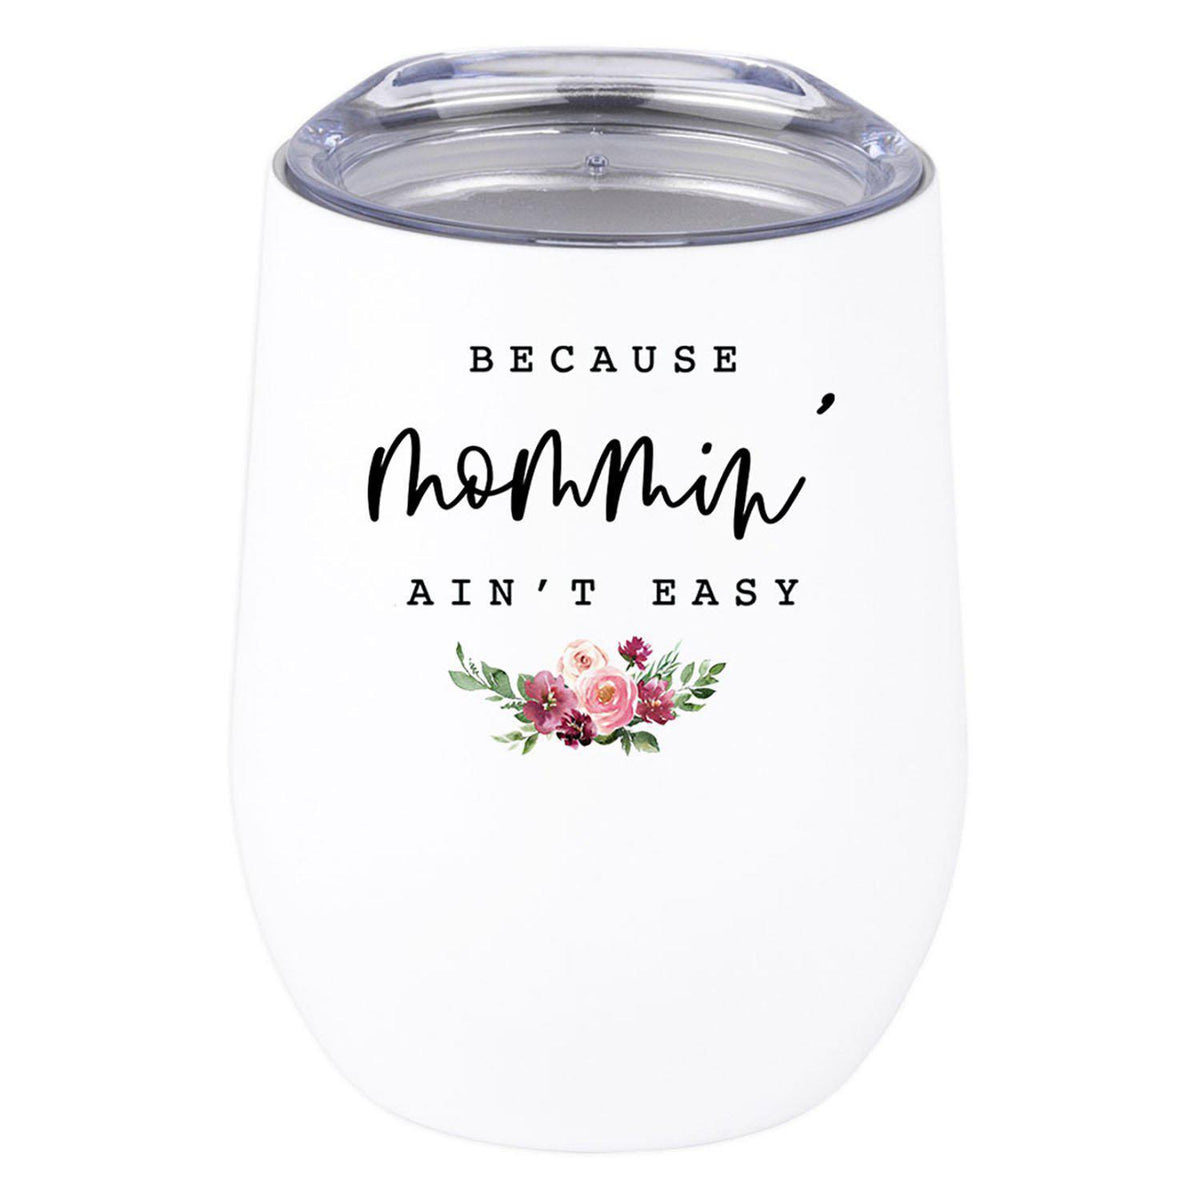 Funny Wine Tumbler Mommy Juice Laser Engraved Insulated